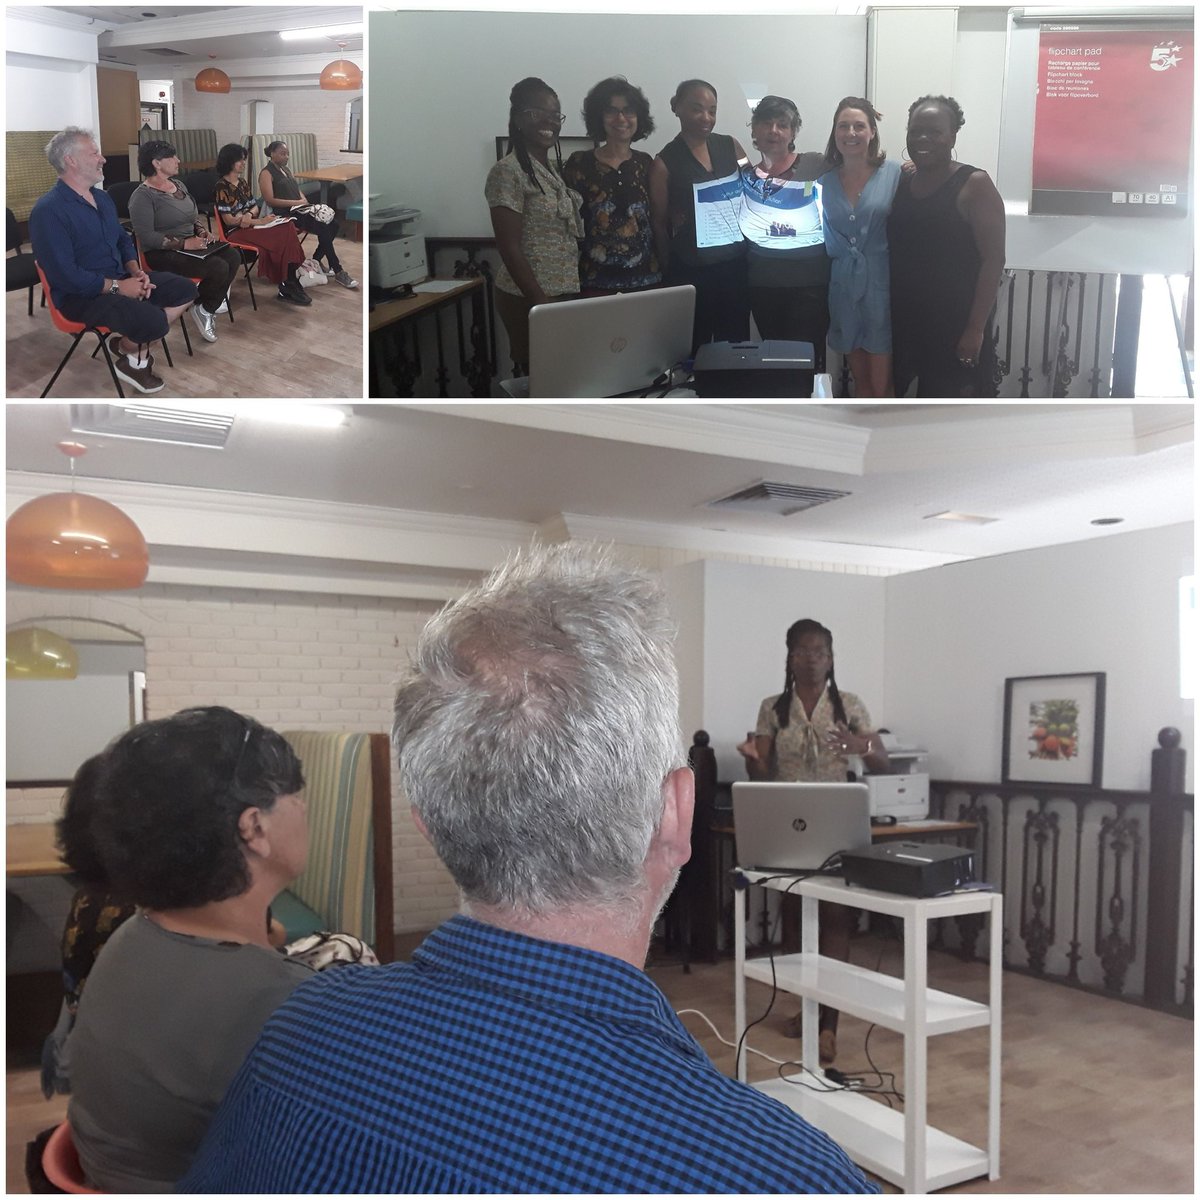 Bringing 'Starting a Business & Managing Finances' Mini Workshop to the local community yesterday @Thrive @SE16Connector #localcommunity #business #startup #managingfinances #accounting #taxation #southwark #croydon #lewisham